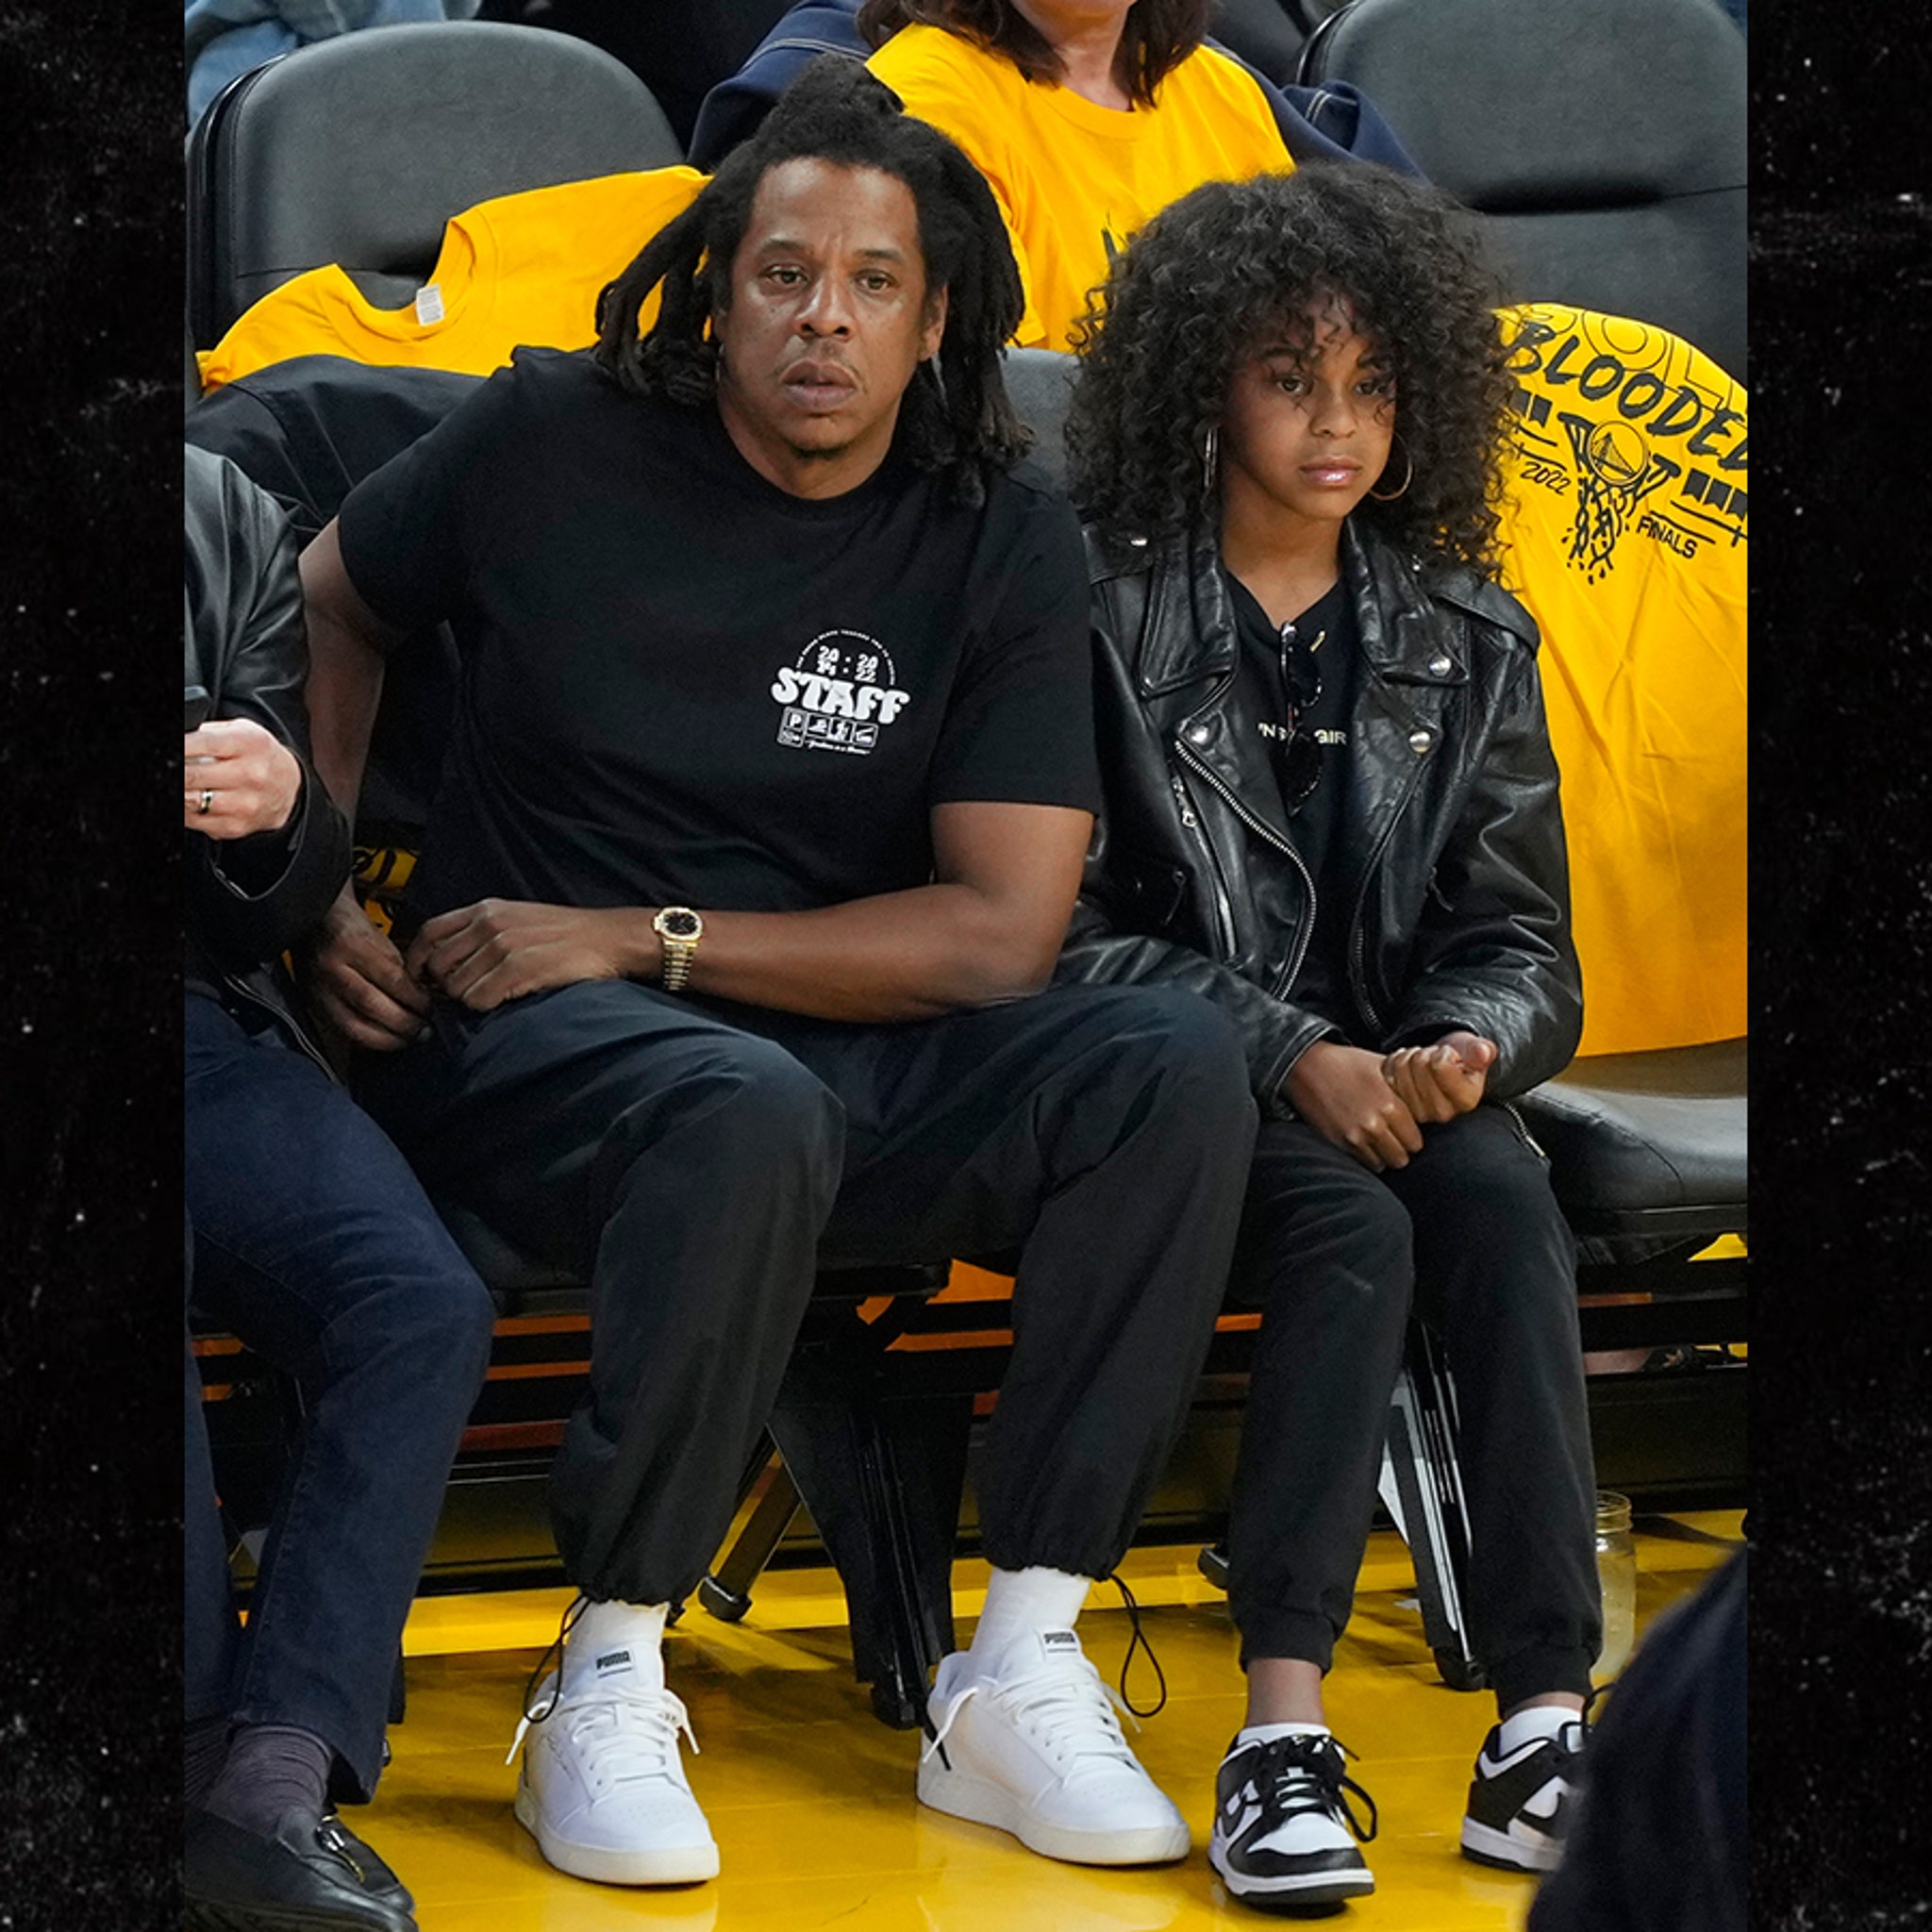 People are amazed at how much Blue Ivy Carter looks like Beyonce at recent  NBA outing: 'Literally twins